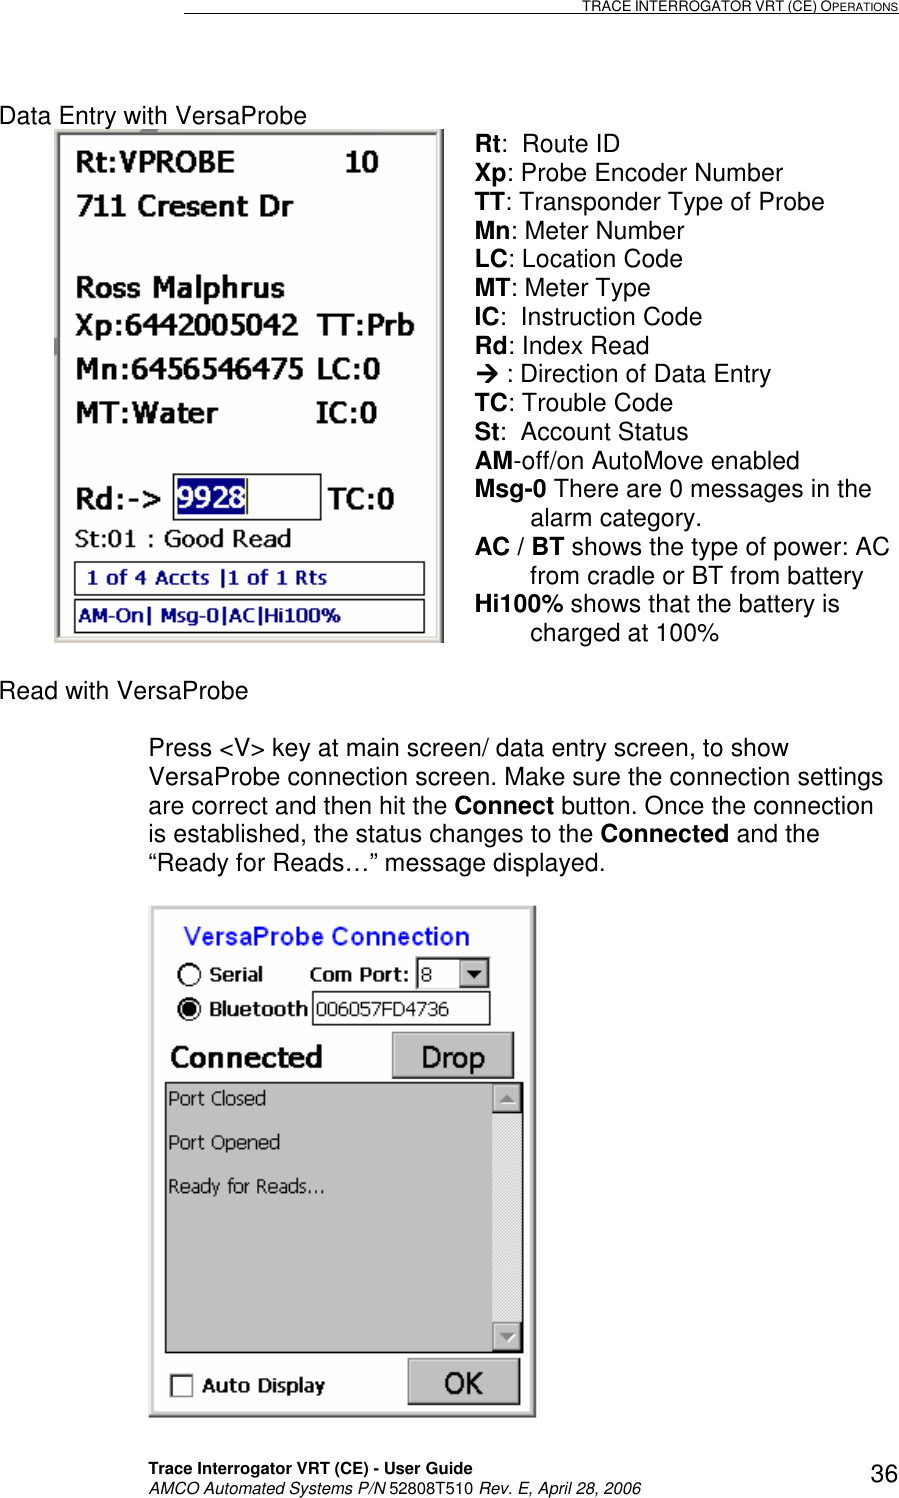                                                                                                                              TRACE INTERROGATOR VRT (CE) OPERATIONS    Trace Interrogator VRT (CE) - User Guide   AMCO Automated Systems P/N 52808T510 Rev. E, April 28, 2006 36Data Entry with VersaProbe  Rt:  Route ID Xp: Probe Encoder Number TT: Transponder Type of Probe Mn: Meter Number LC: Location Code MT: Meter Type IC:  Instruction Code Rd: Index Read  : Direction of Data Entry TC: Trouble Code St:  Account Status AM-off/on AutoMove enabled Msg-0 There are 0 messages in the           alarm category. AC / BT shows the type of power: AC          from cradle or BT from battery Hi100% shows that the battery is                 charged at 100%  Read with VersaProbe  Press &lt;V&gt; key at main screen/ data entry screen, to show VersaProbe connection screen. Make sure the connection settings are correct and then hit the Connect button. Once the connection is established, the status changes to the Connected and the “Ready for Reads…” message displayed.   